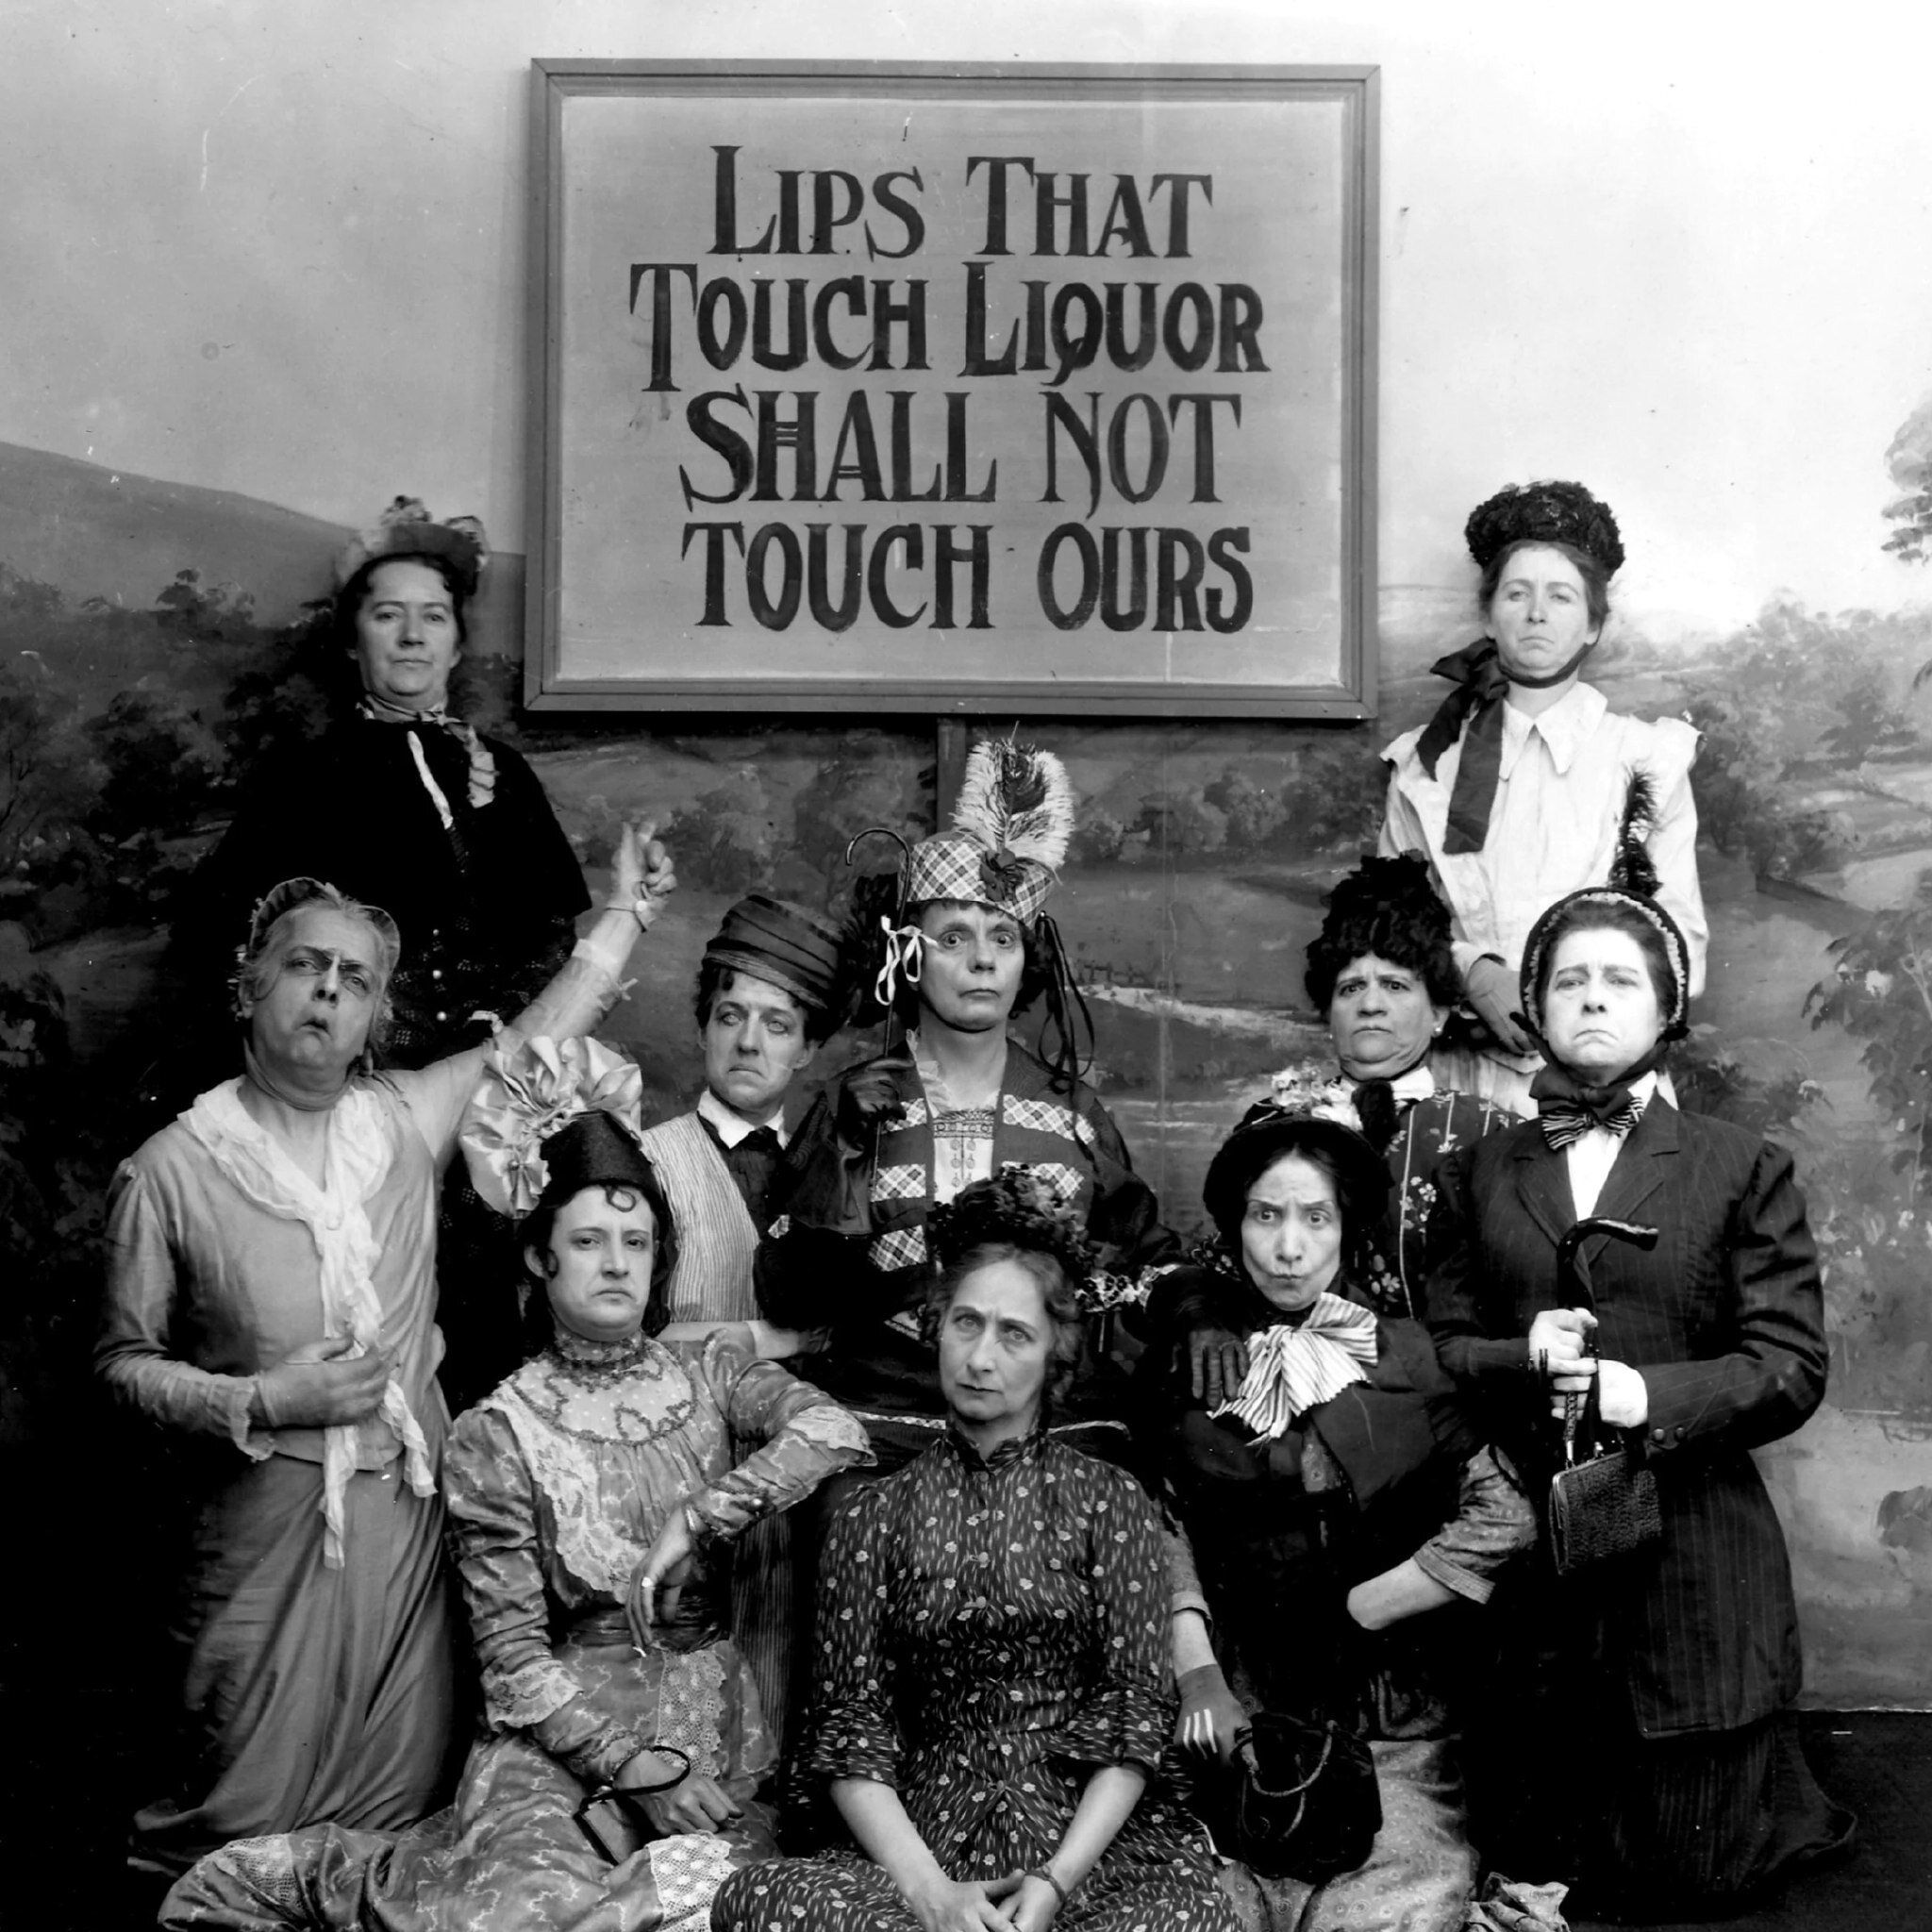 The intriguing paradox of the 'Lips that Touch Liquor Shall Not Touch Ours' movement - a women-led campaign advocating temperance during the prohibition era 🫢❌

Yet, behind the scenes, these very same trailblazers sipped bootlegged cocktails in secr